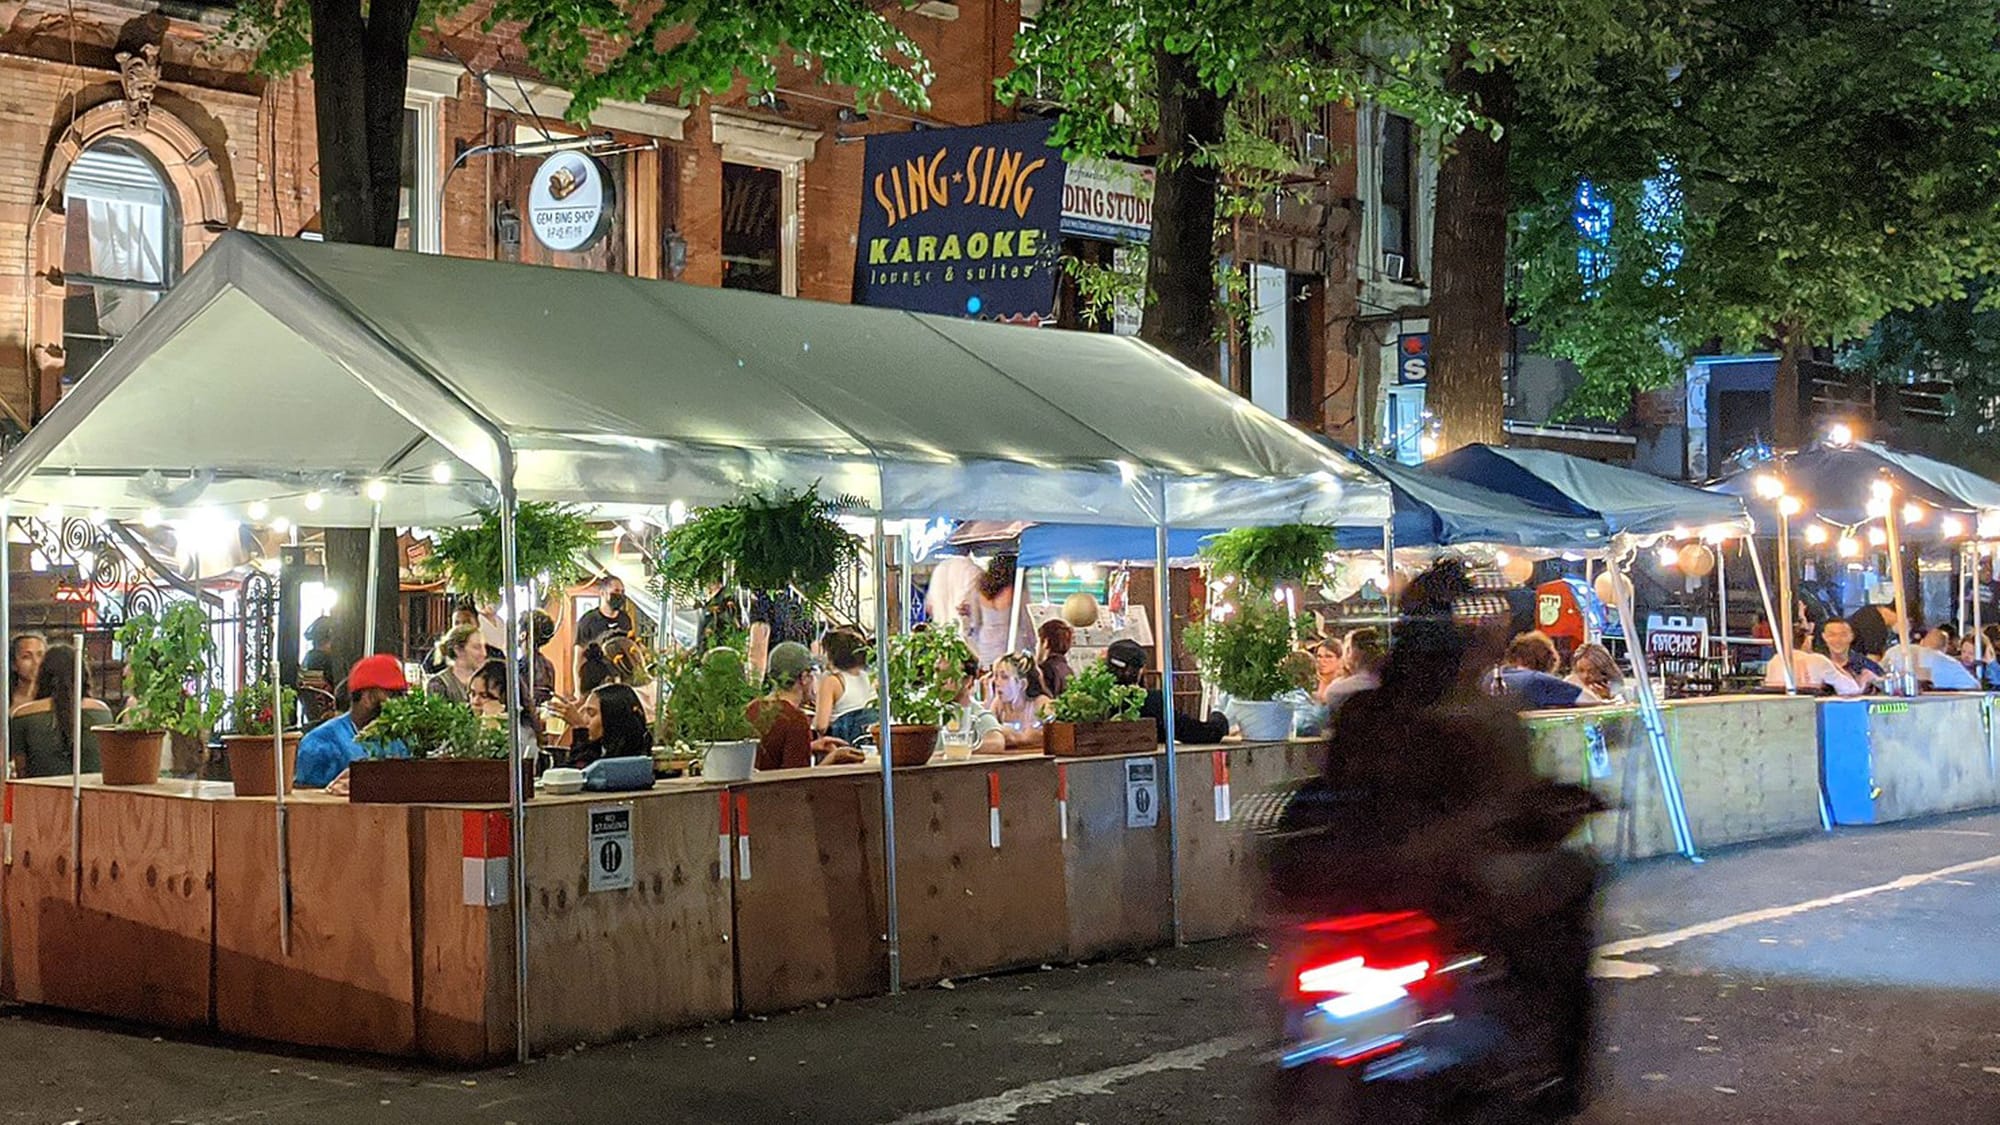 An outdoor dining setup on a tree-lined street outside the Sing-Sing Karaoke Lounge on St. Mark's in New York City's East Village during the pandemic, with lots of people eating, drinking and having fun, and a motorbike speeding past in the foreground